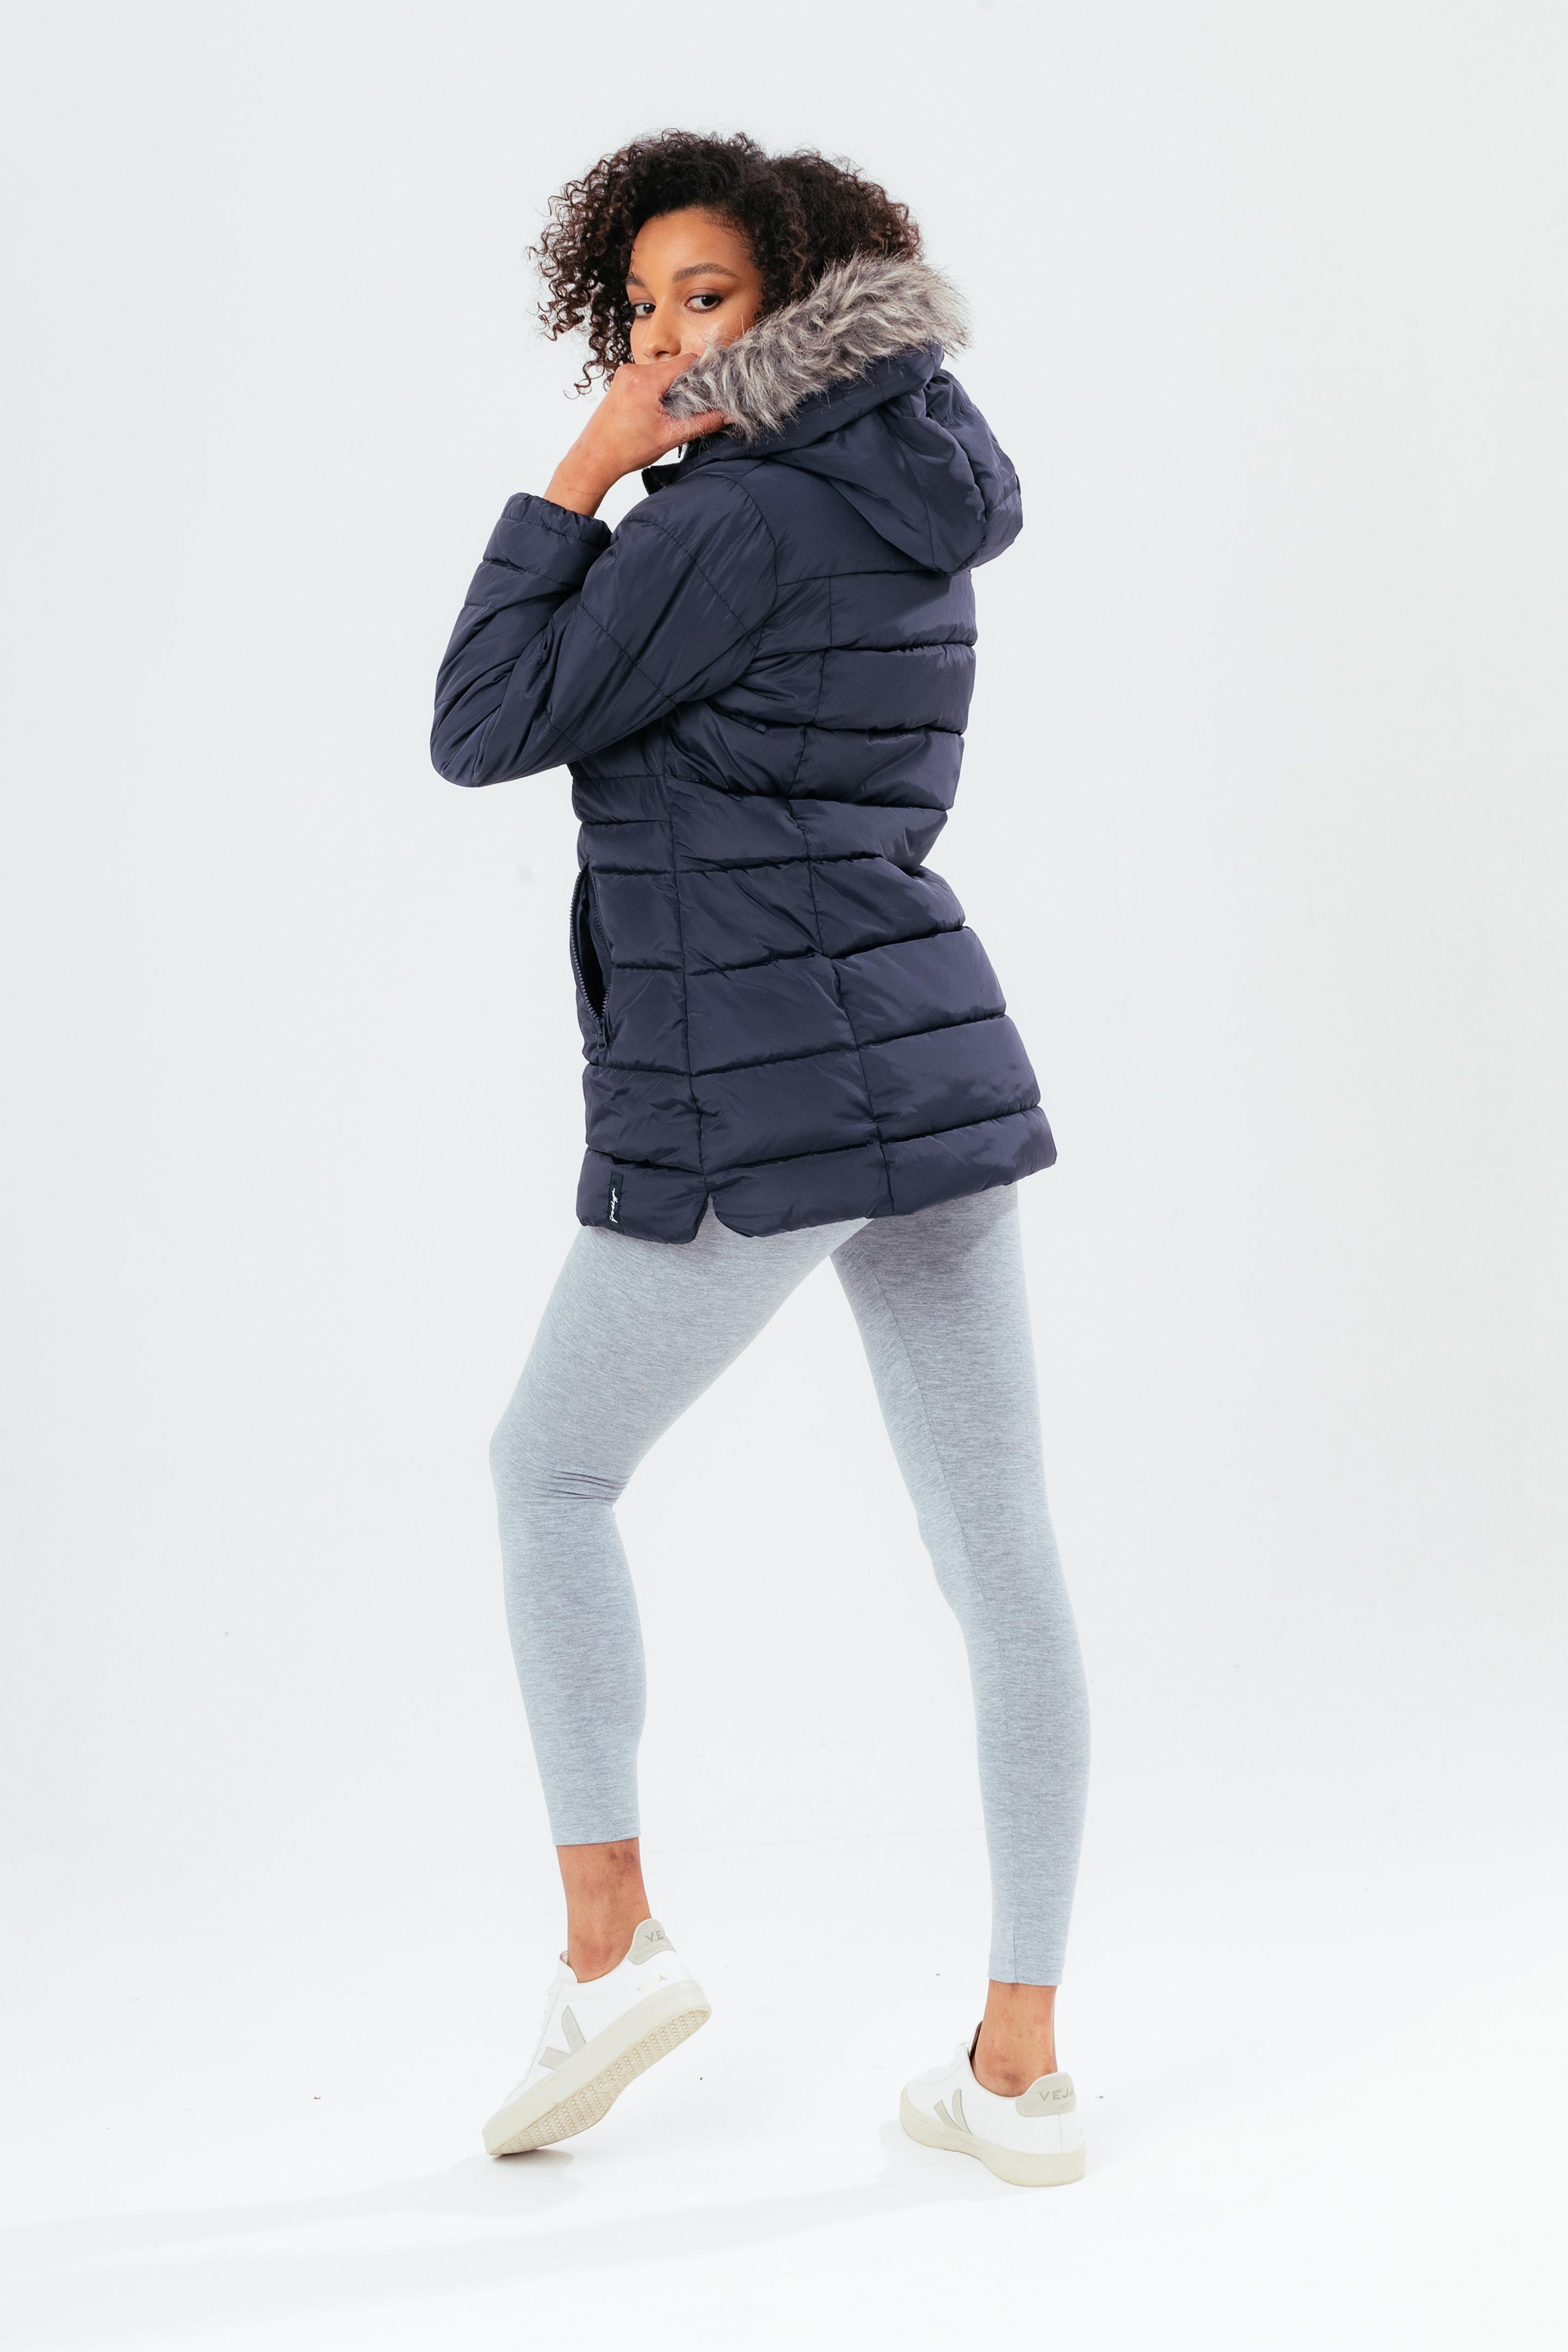 Alternate View 2 of HYPE NAVY MID LENGTH WOMEN'S PADDED COAT WITH FUR